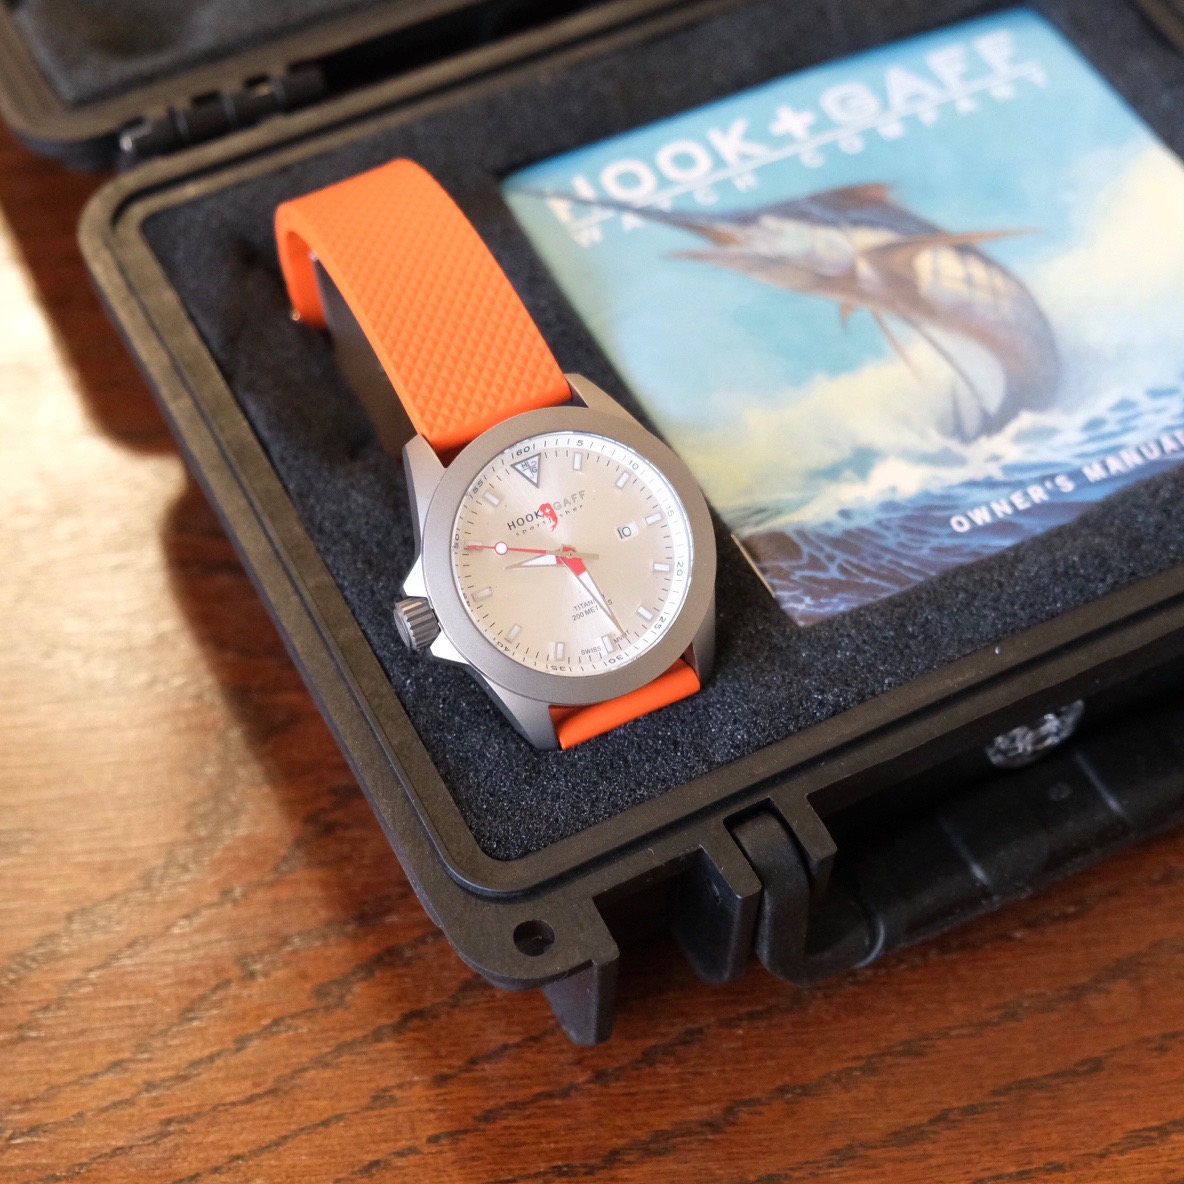 Hook+Gaff Sportsfisher Black: Review - The Truth About Watches